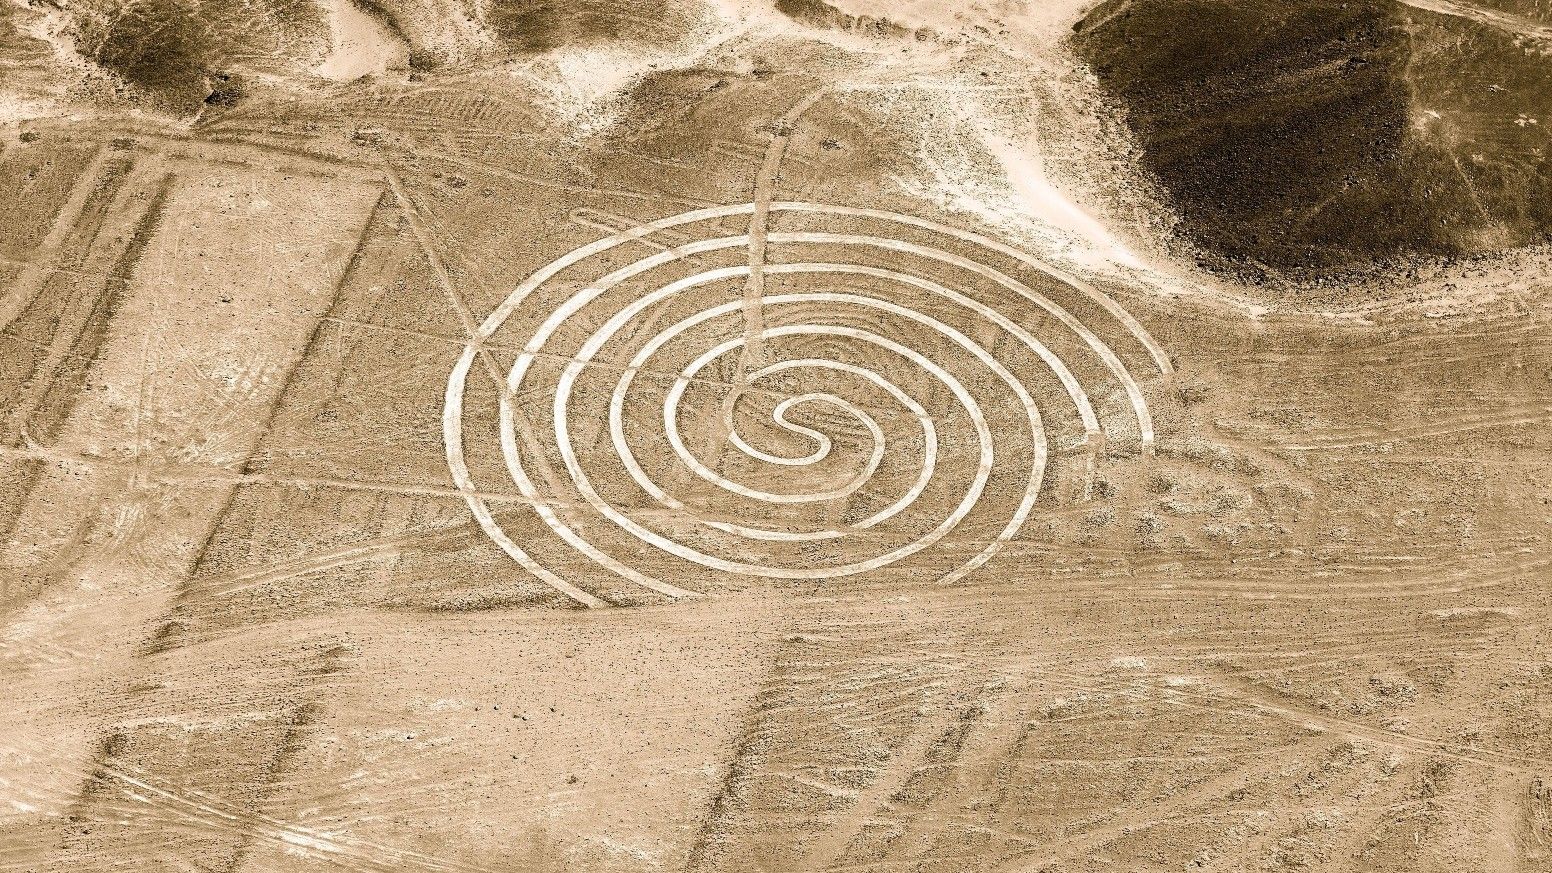 <p>                     Not all of the lines depict animals. Some form wavy lines, trapezoids and spirals that resemble labyrinths. While labyrinths are often intended to be walked on as a form of meditation, some experts think this geoglyph, in particular, may have been intended as a portal for gods or spirits, Live Science previously reported.                    </p>